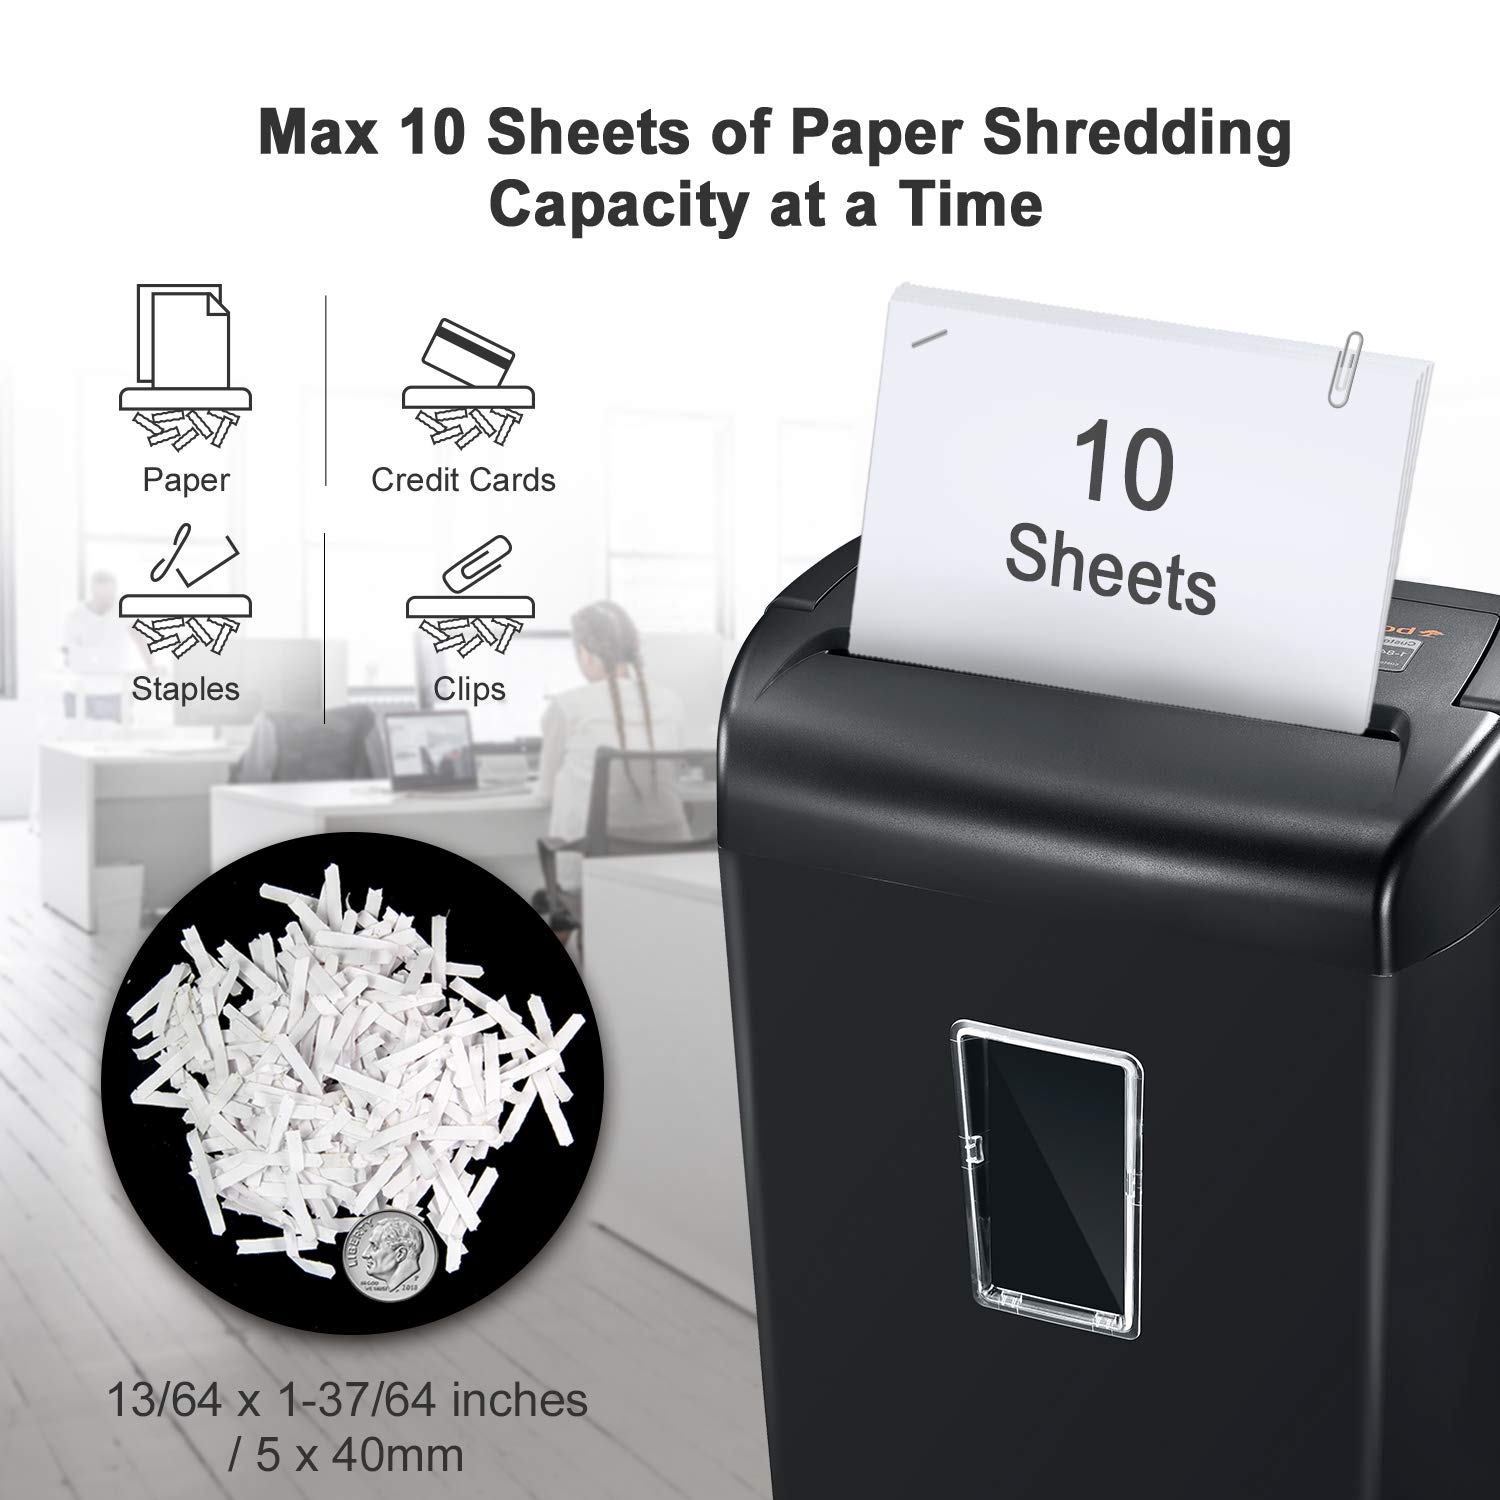 GCP Products 10-Sheet Cross-Cut Paper Shredder, Credit Card Shredders For Home Office Use, 5.5 Gallons Large